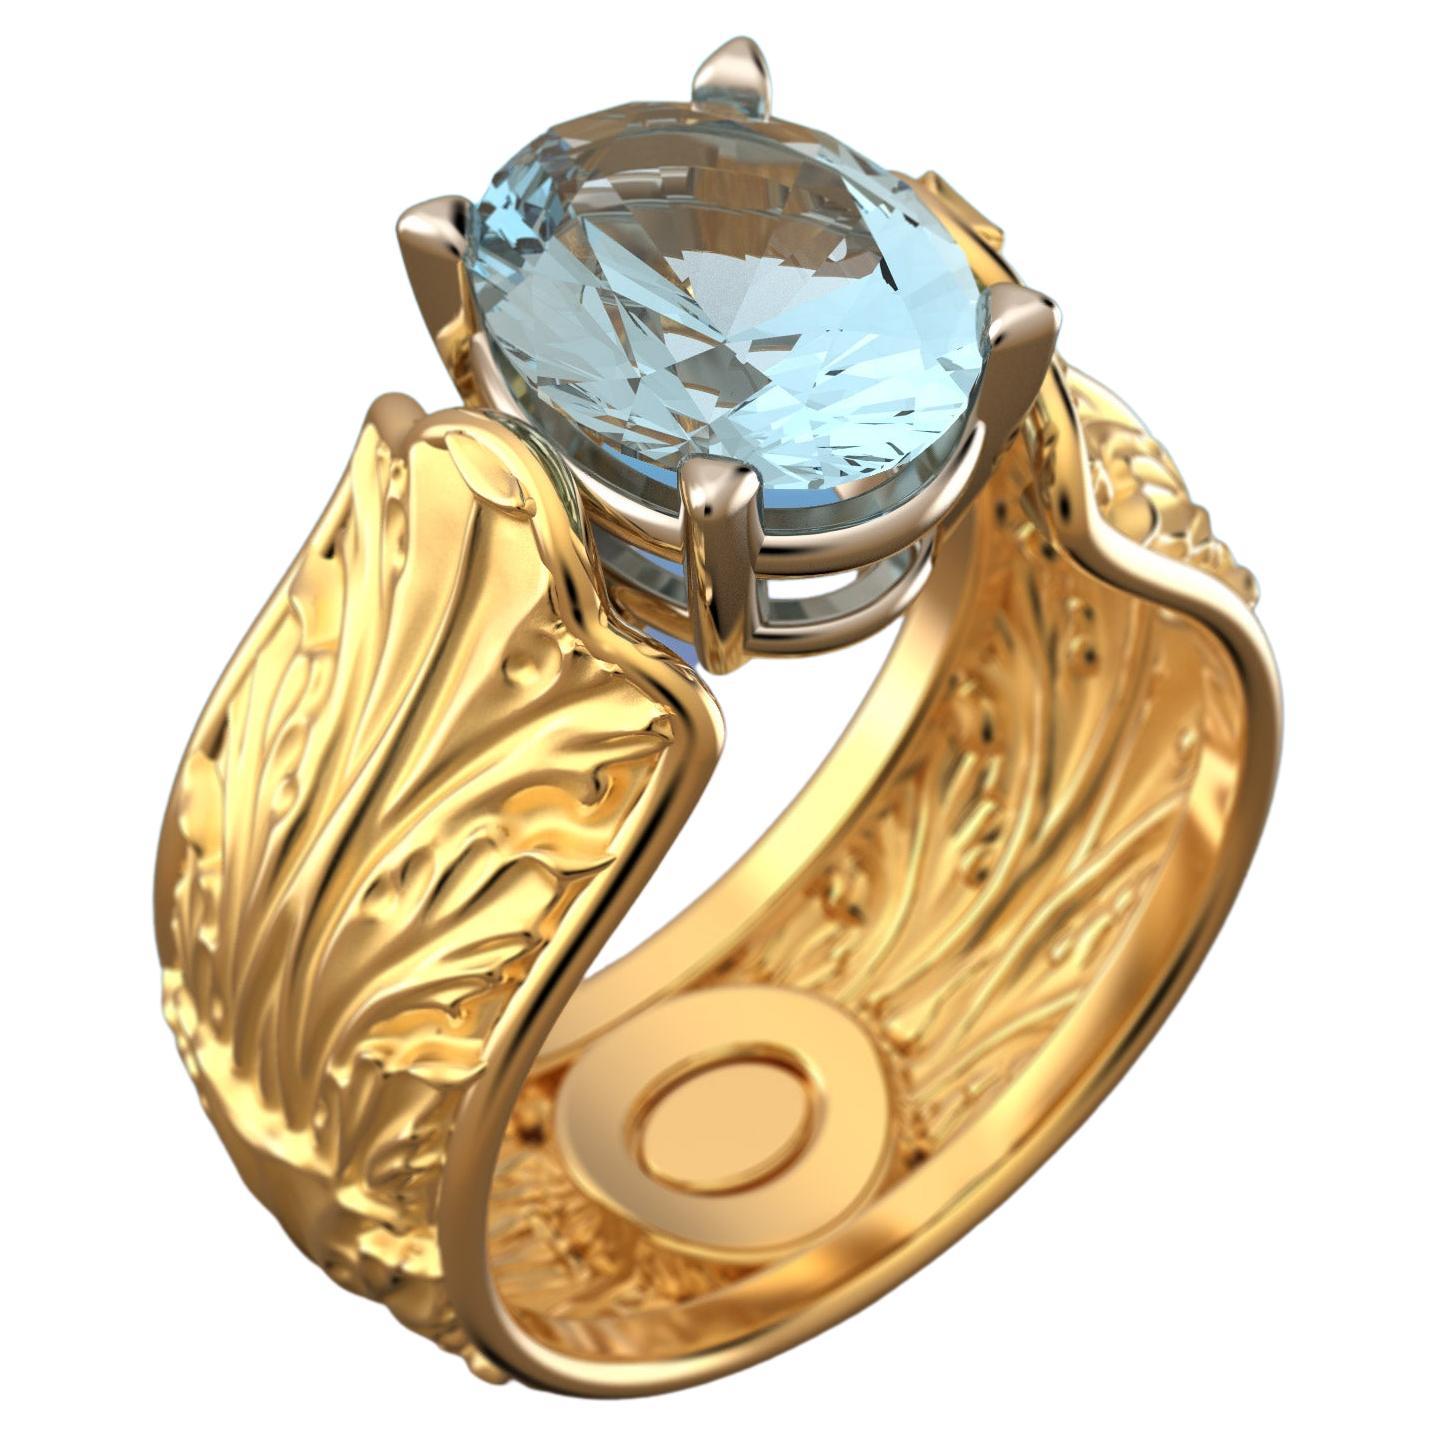 Baroque 18k Gold Ring with Natural Aquamarine Italian Fine Jewelry Made in Italy